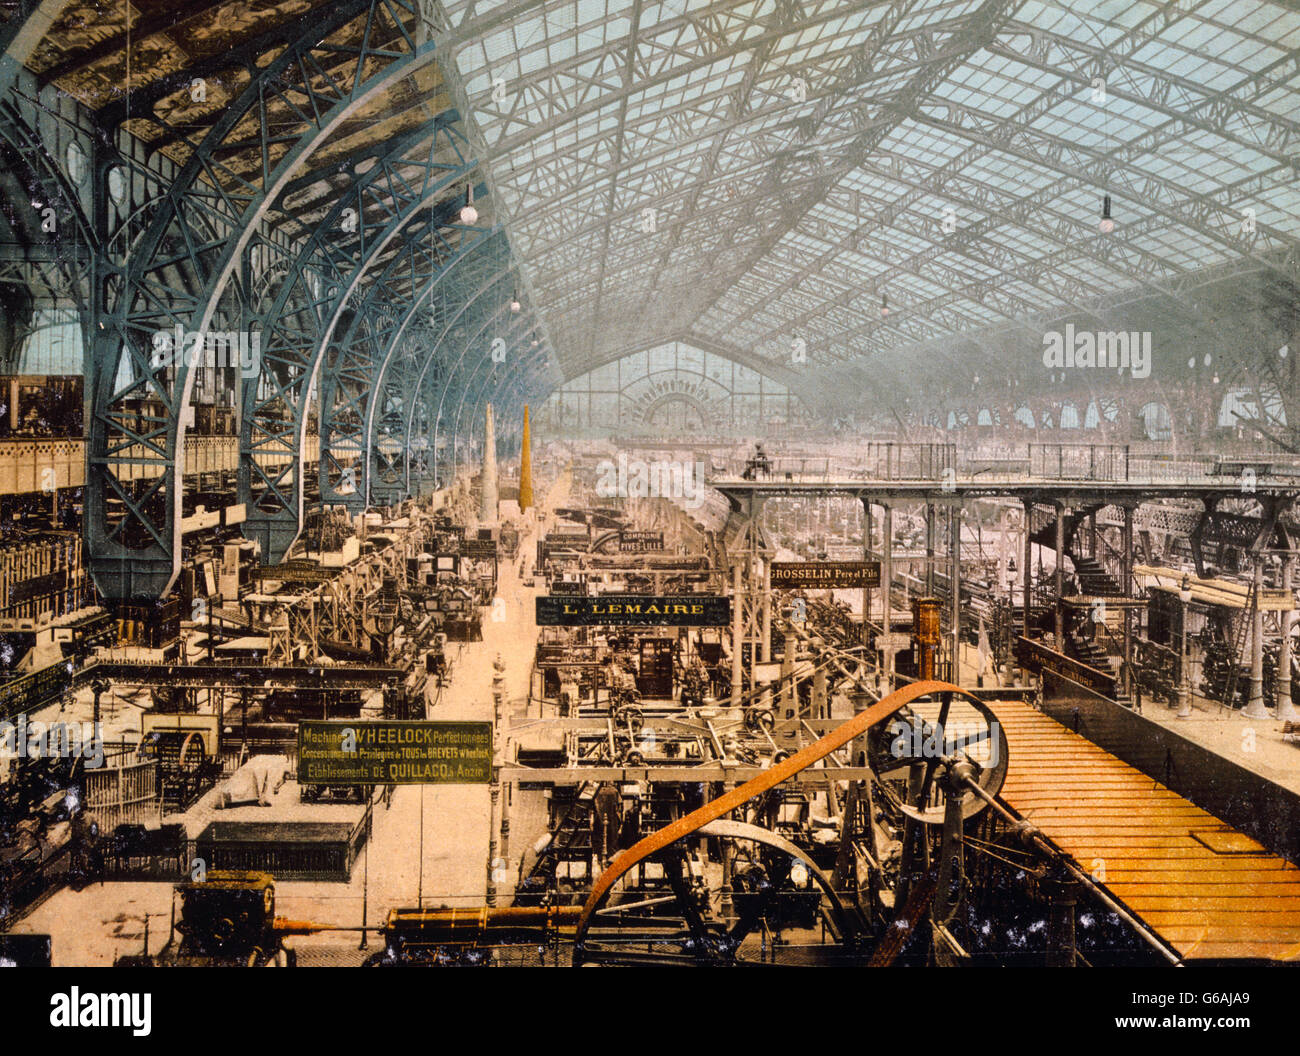 Paris Exposition, 1889. Interior view of the Gallery of Machines, Exposition Universelle Internationale de 1889, Paris, France. Stock Photo